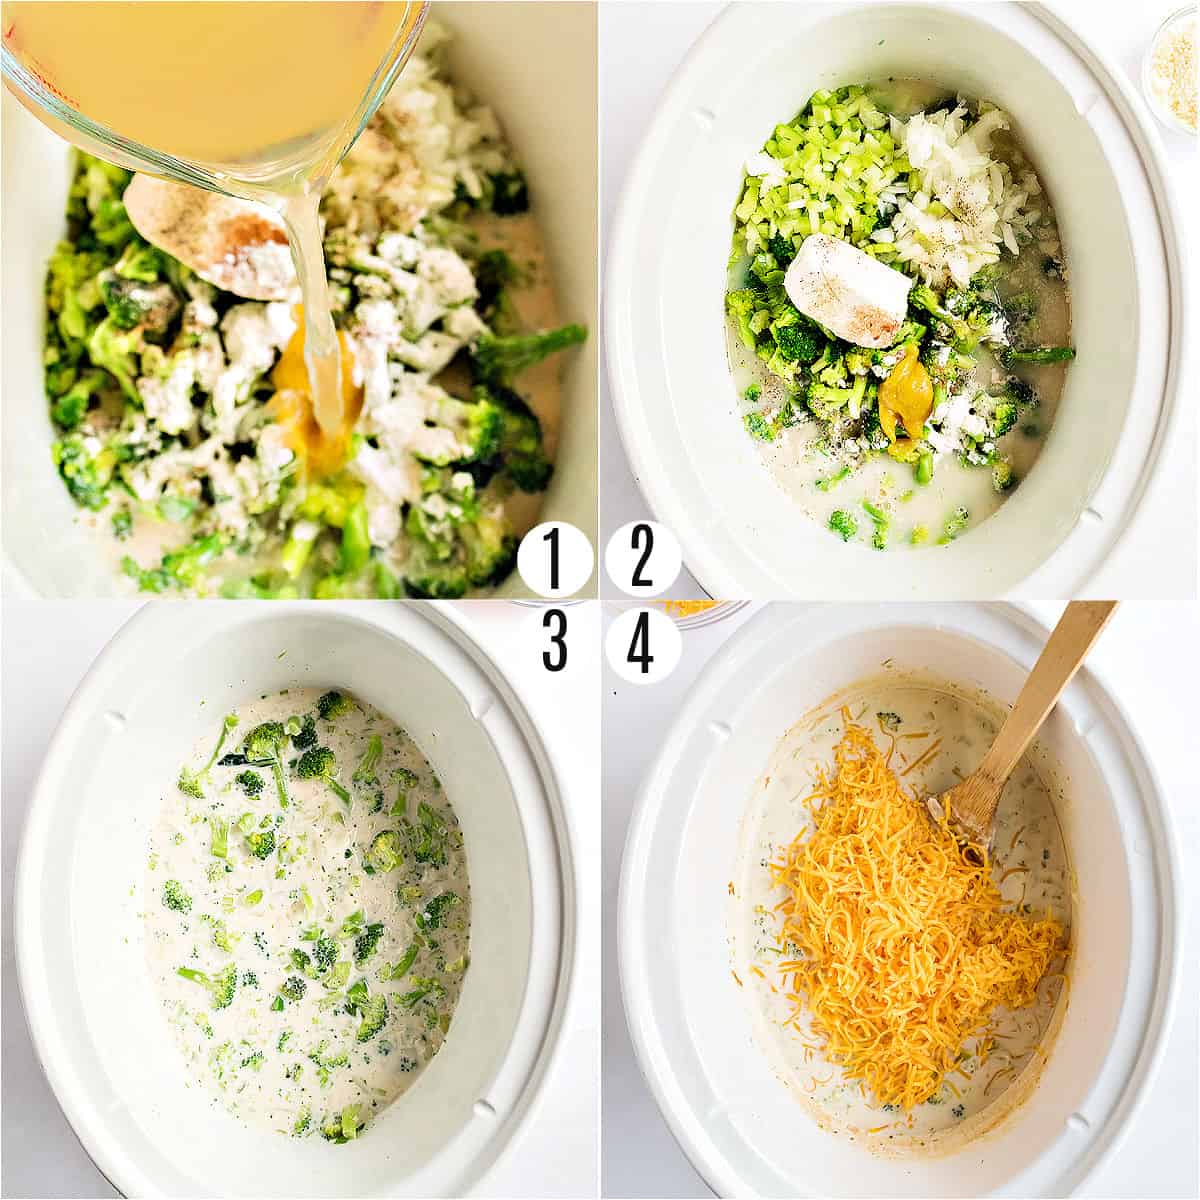 Step by step photos showing how to make crockpot broccoli cheese soup.